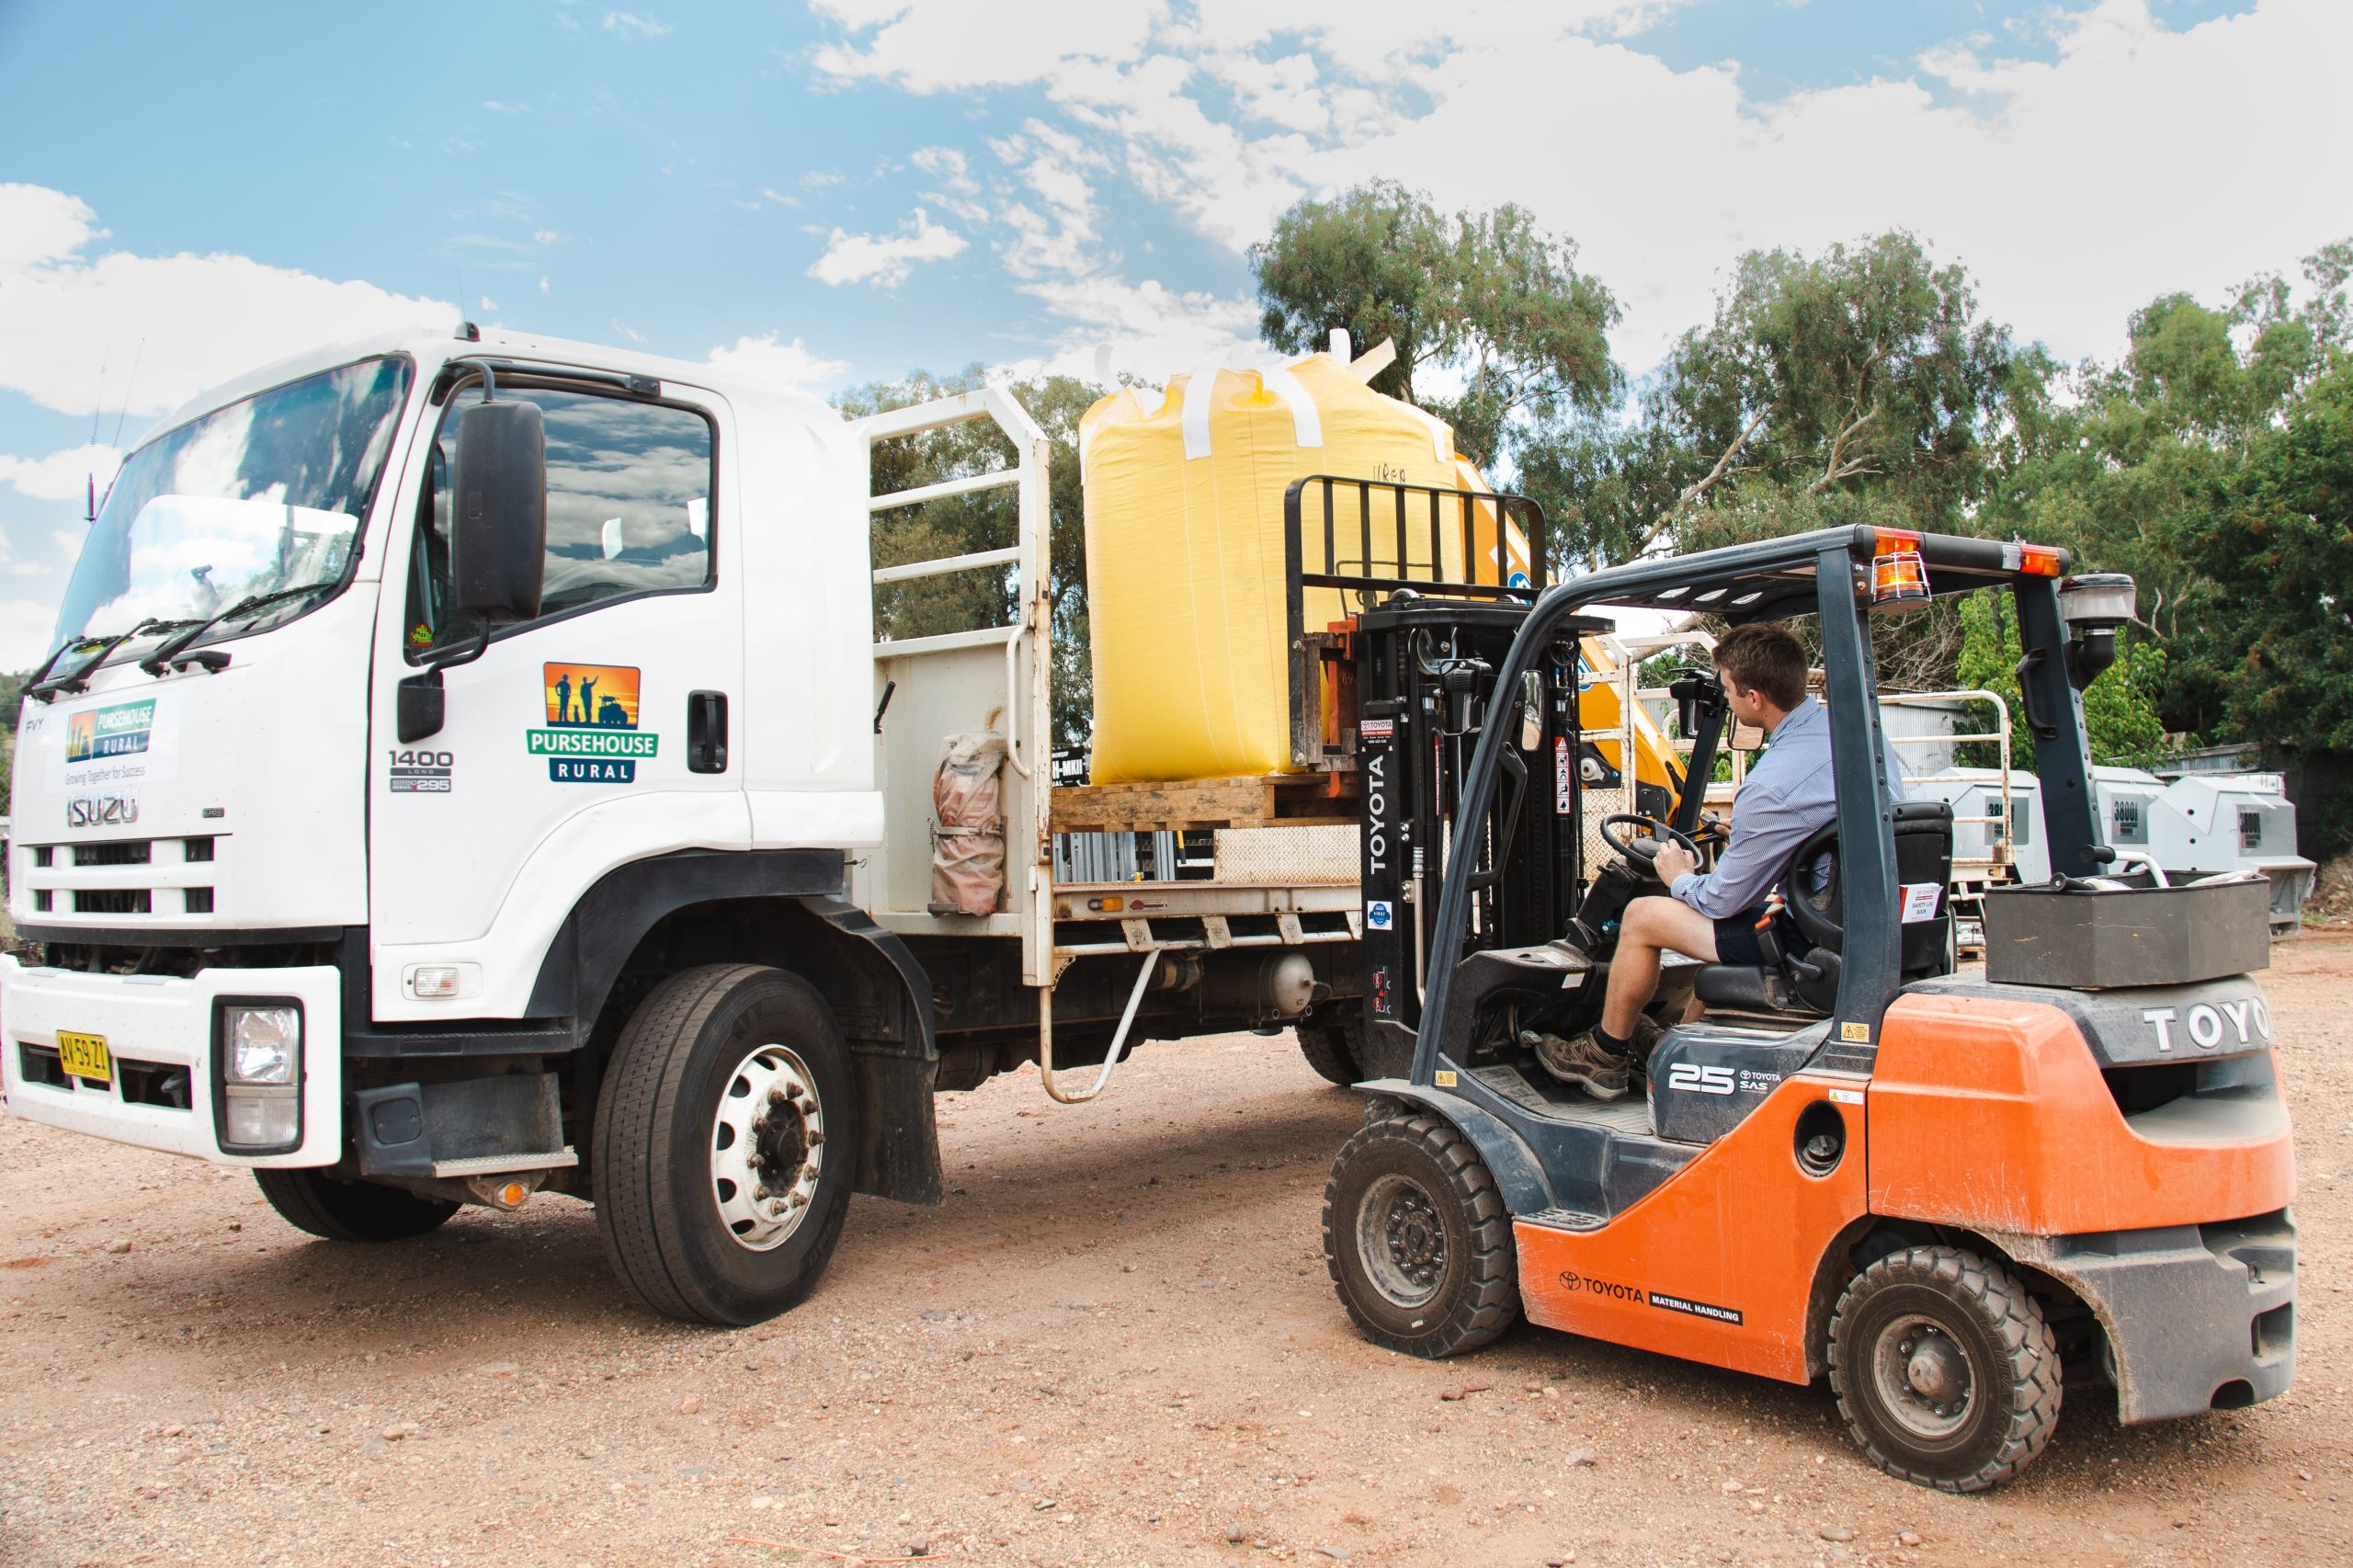 Pursehouse Rural employee lifting fertiliser onto Pursehouse Rural delivery truck with forklift